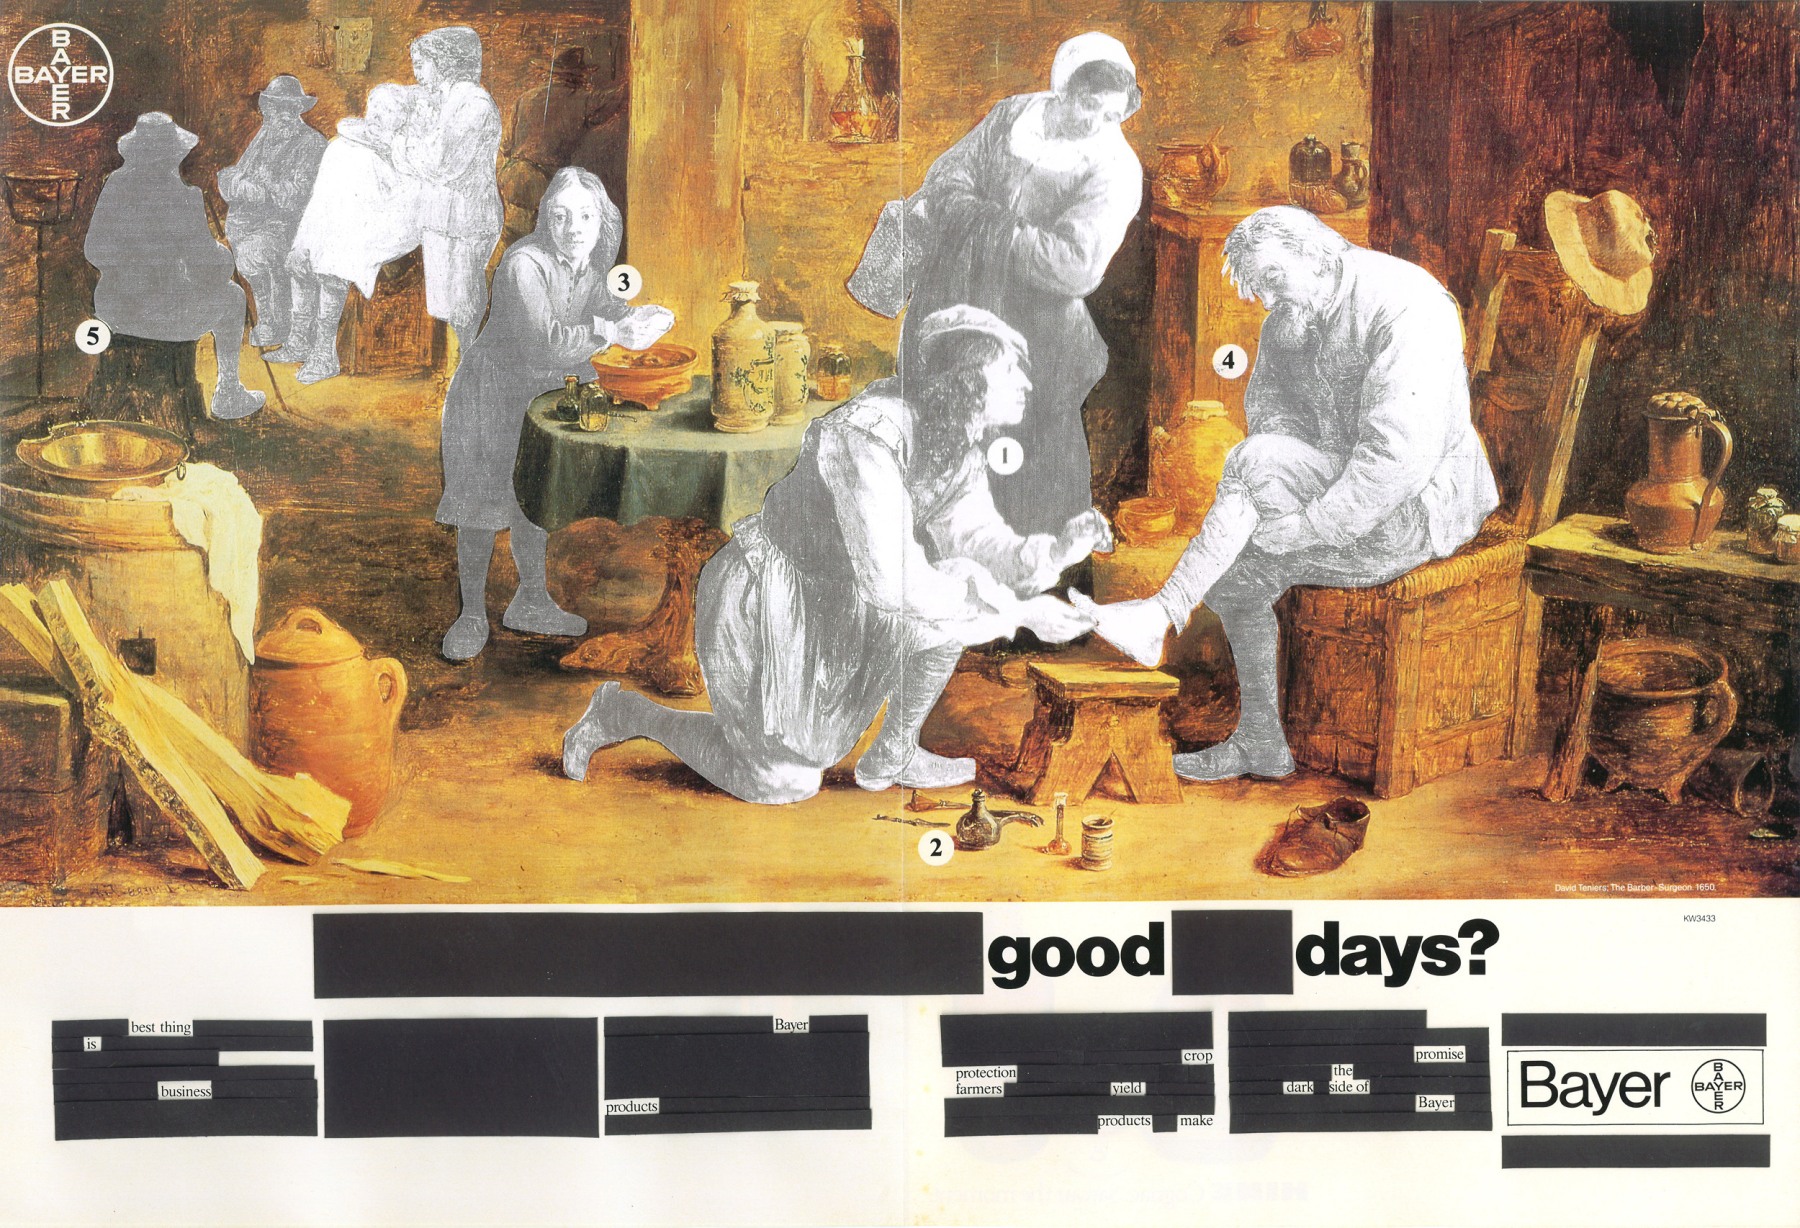 Rectangular collage on Bayer advertisement displaying the text 'Good Days'